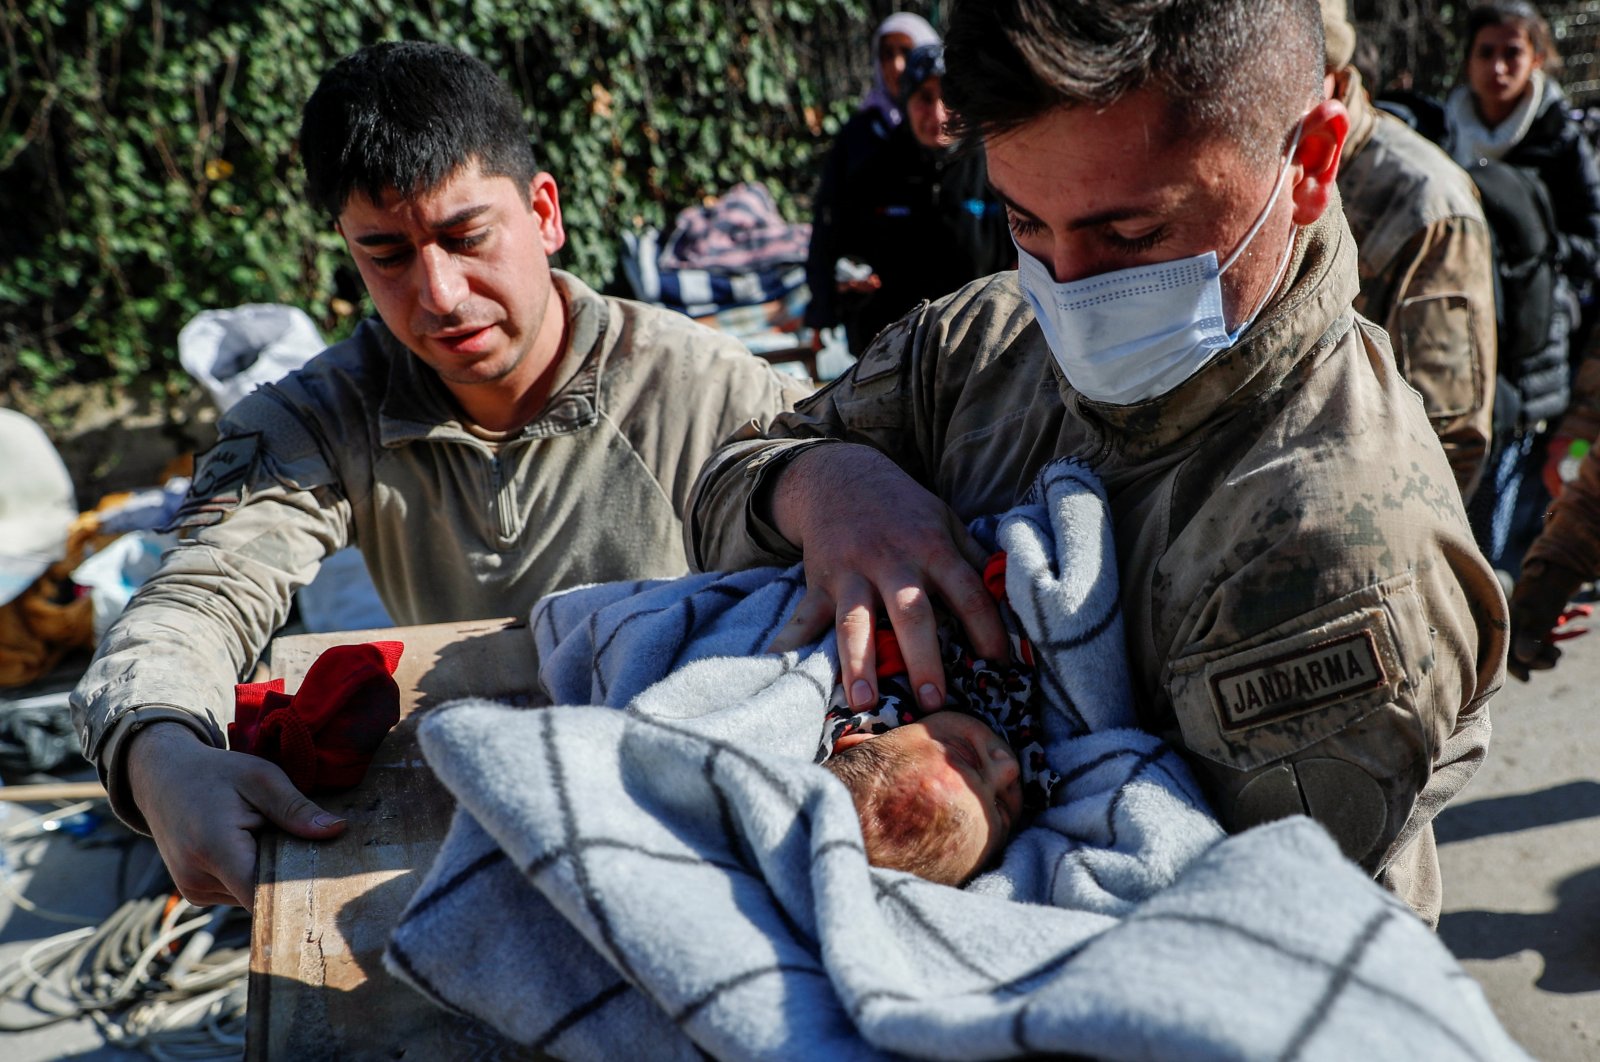 Rescuers carry baby boy Kerem Ağirtaş, a 20-day-old survivor who was pulled from under the rubble, in the aftermath of a deadly earthquake in Hatay, Türkiye, Feb. 8, 2023. (Reuters Photo)